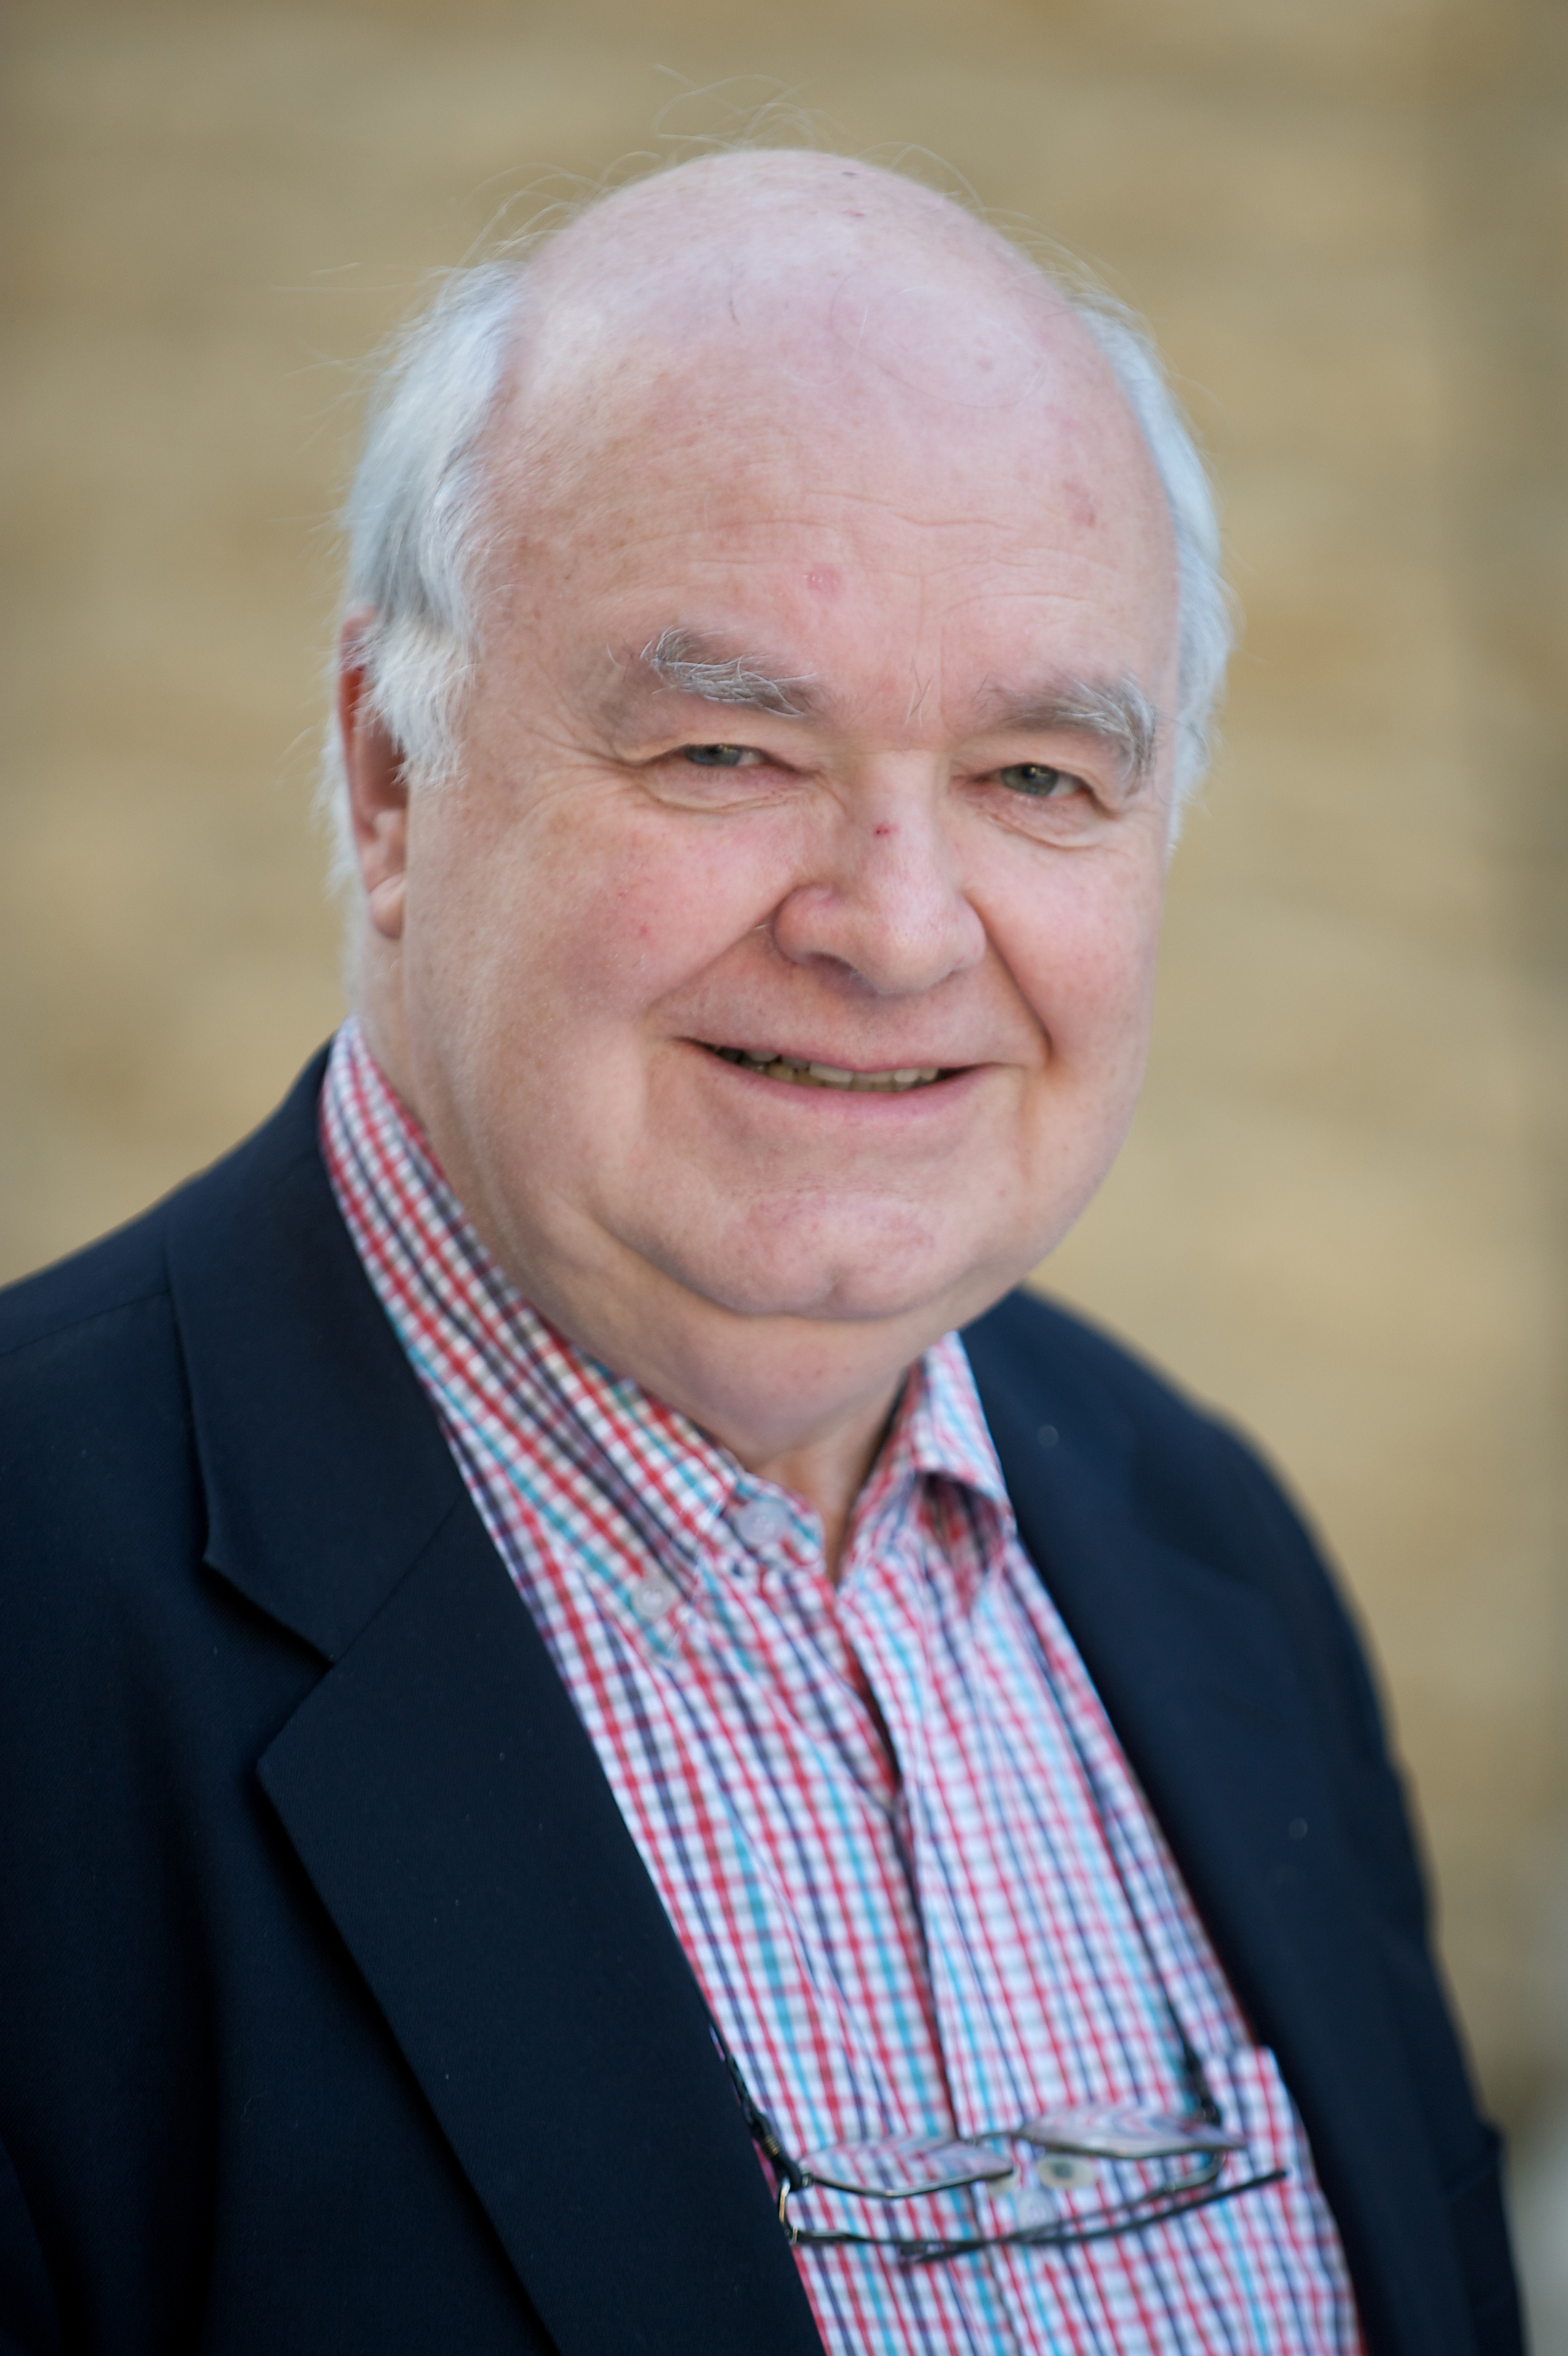 Professor John Lennox is an Emeritus Fellow of Green Templeton College and the college's Pastoral Adviser. He is Emeritus Professor of Mathematics at the University of Oxford.